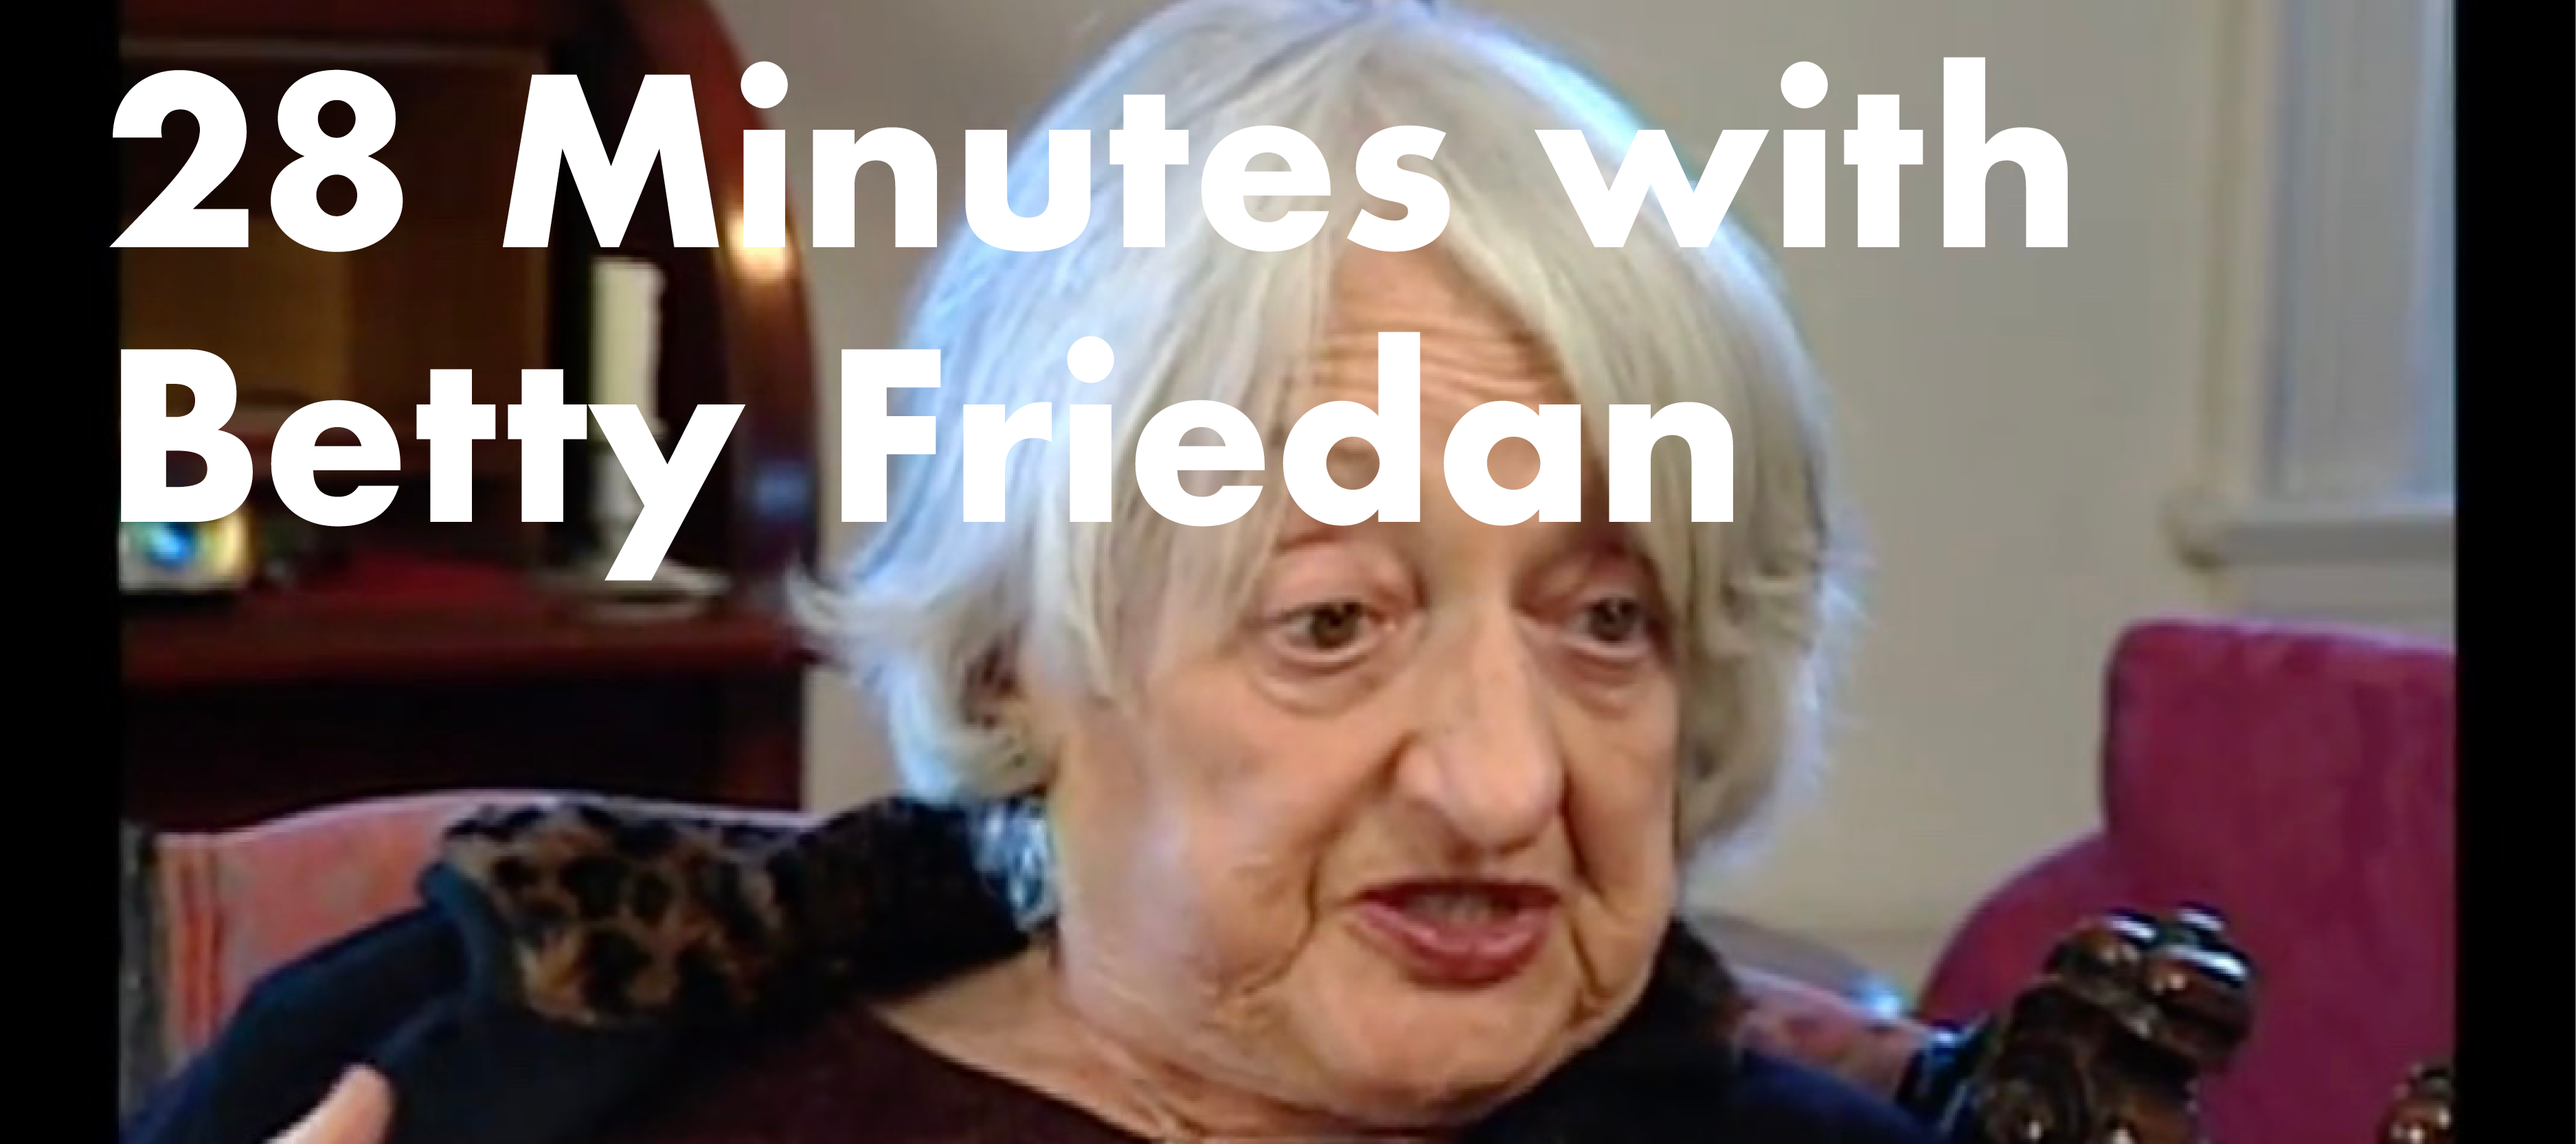 28 Minutes with Betty Friedan: Interview Screening and Q&A